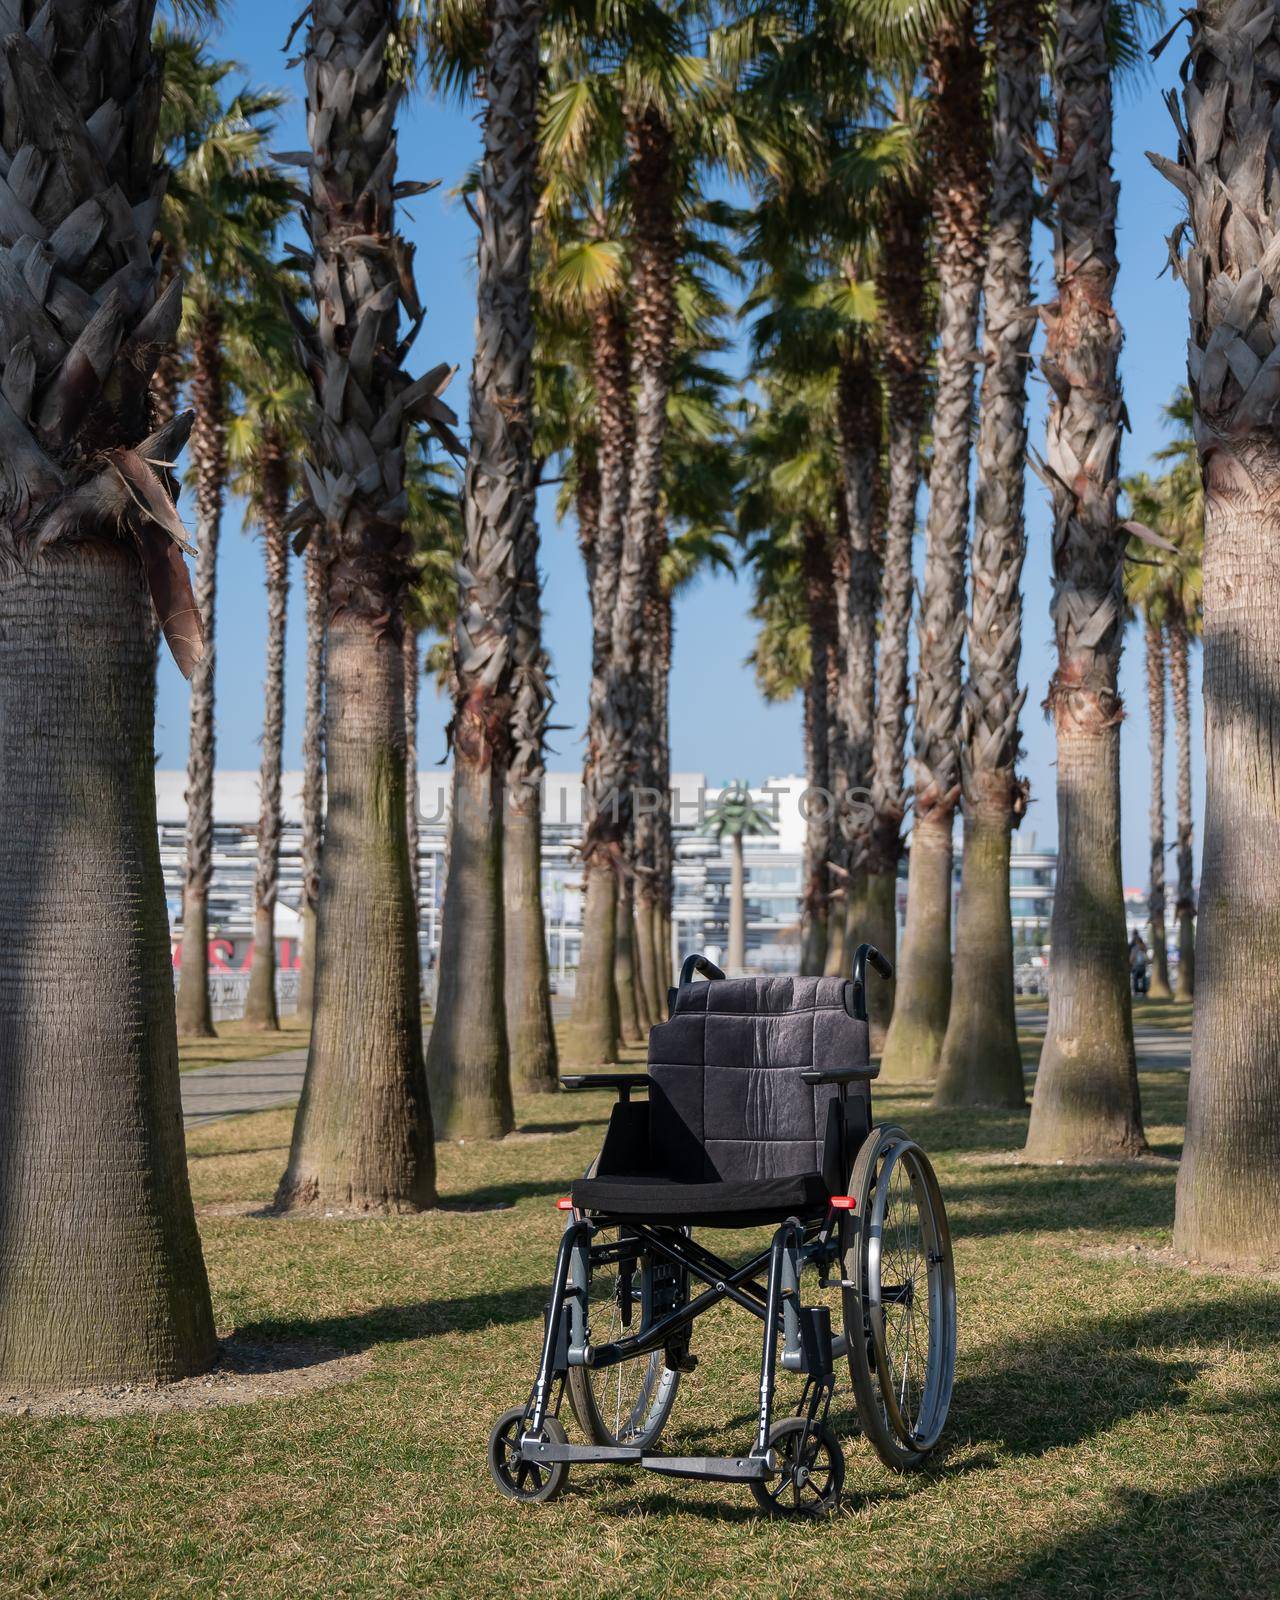 Empty wheelchair under palm trees on a sunny summer day. by mrwed54